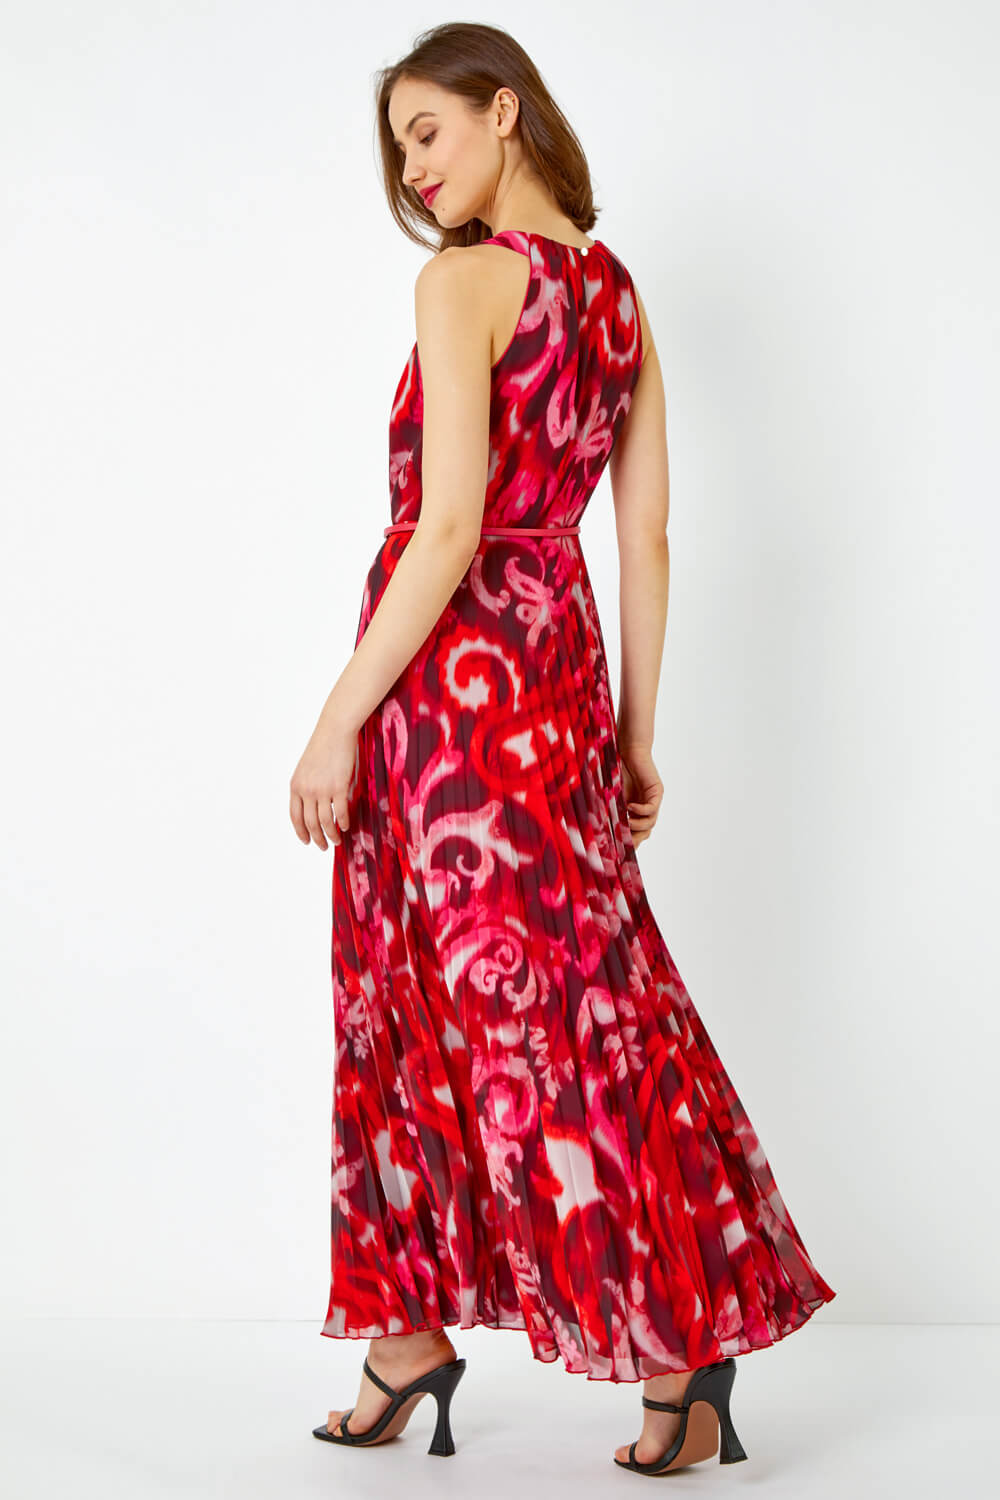 Red Swirl Print Pleated Maxi Dress, Image 3 of 5